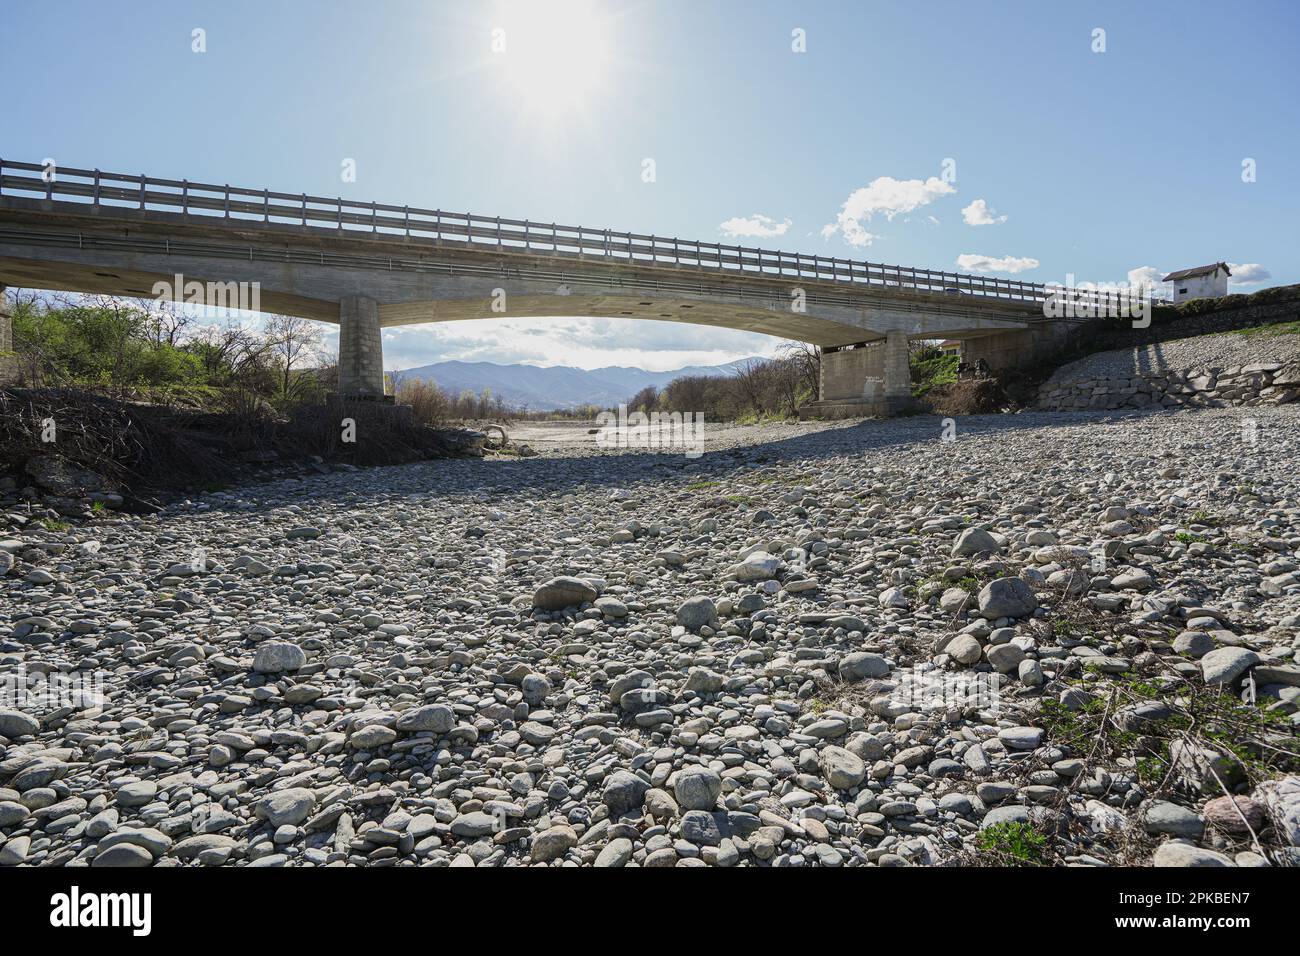 Drought and aridity problems in the Po River, which is completely devoid of water under the bridge, climate change and global warming Stock Photo